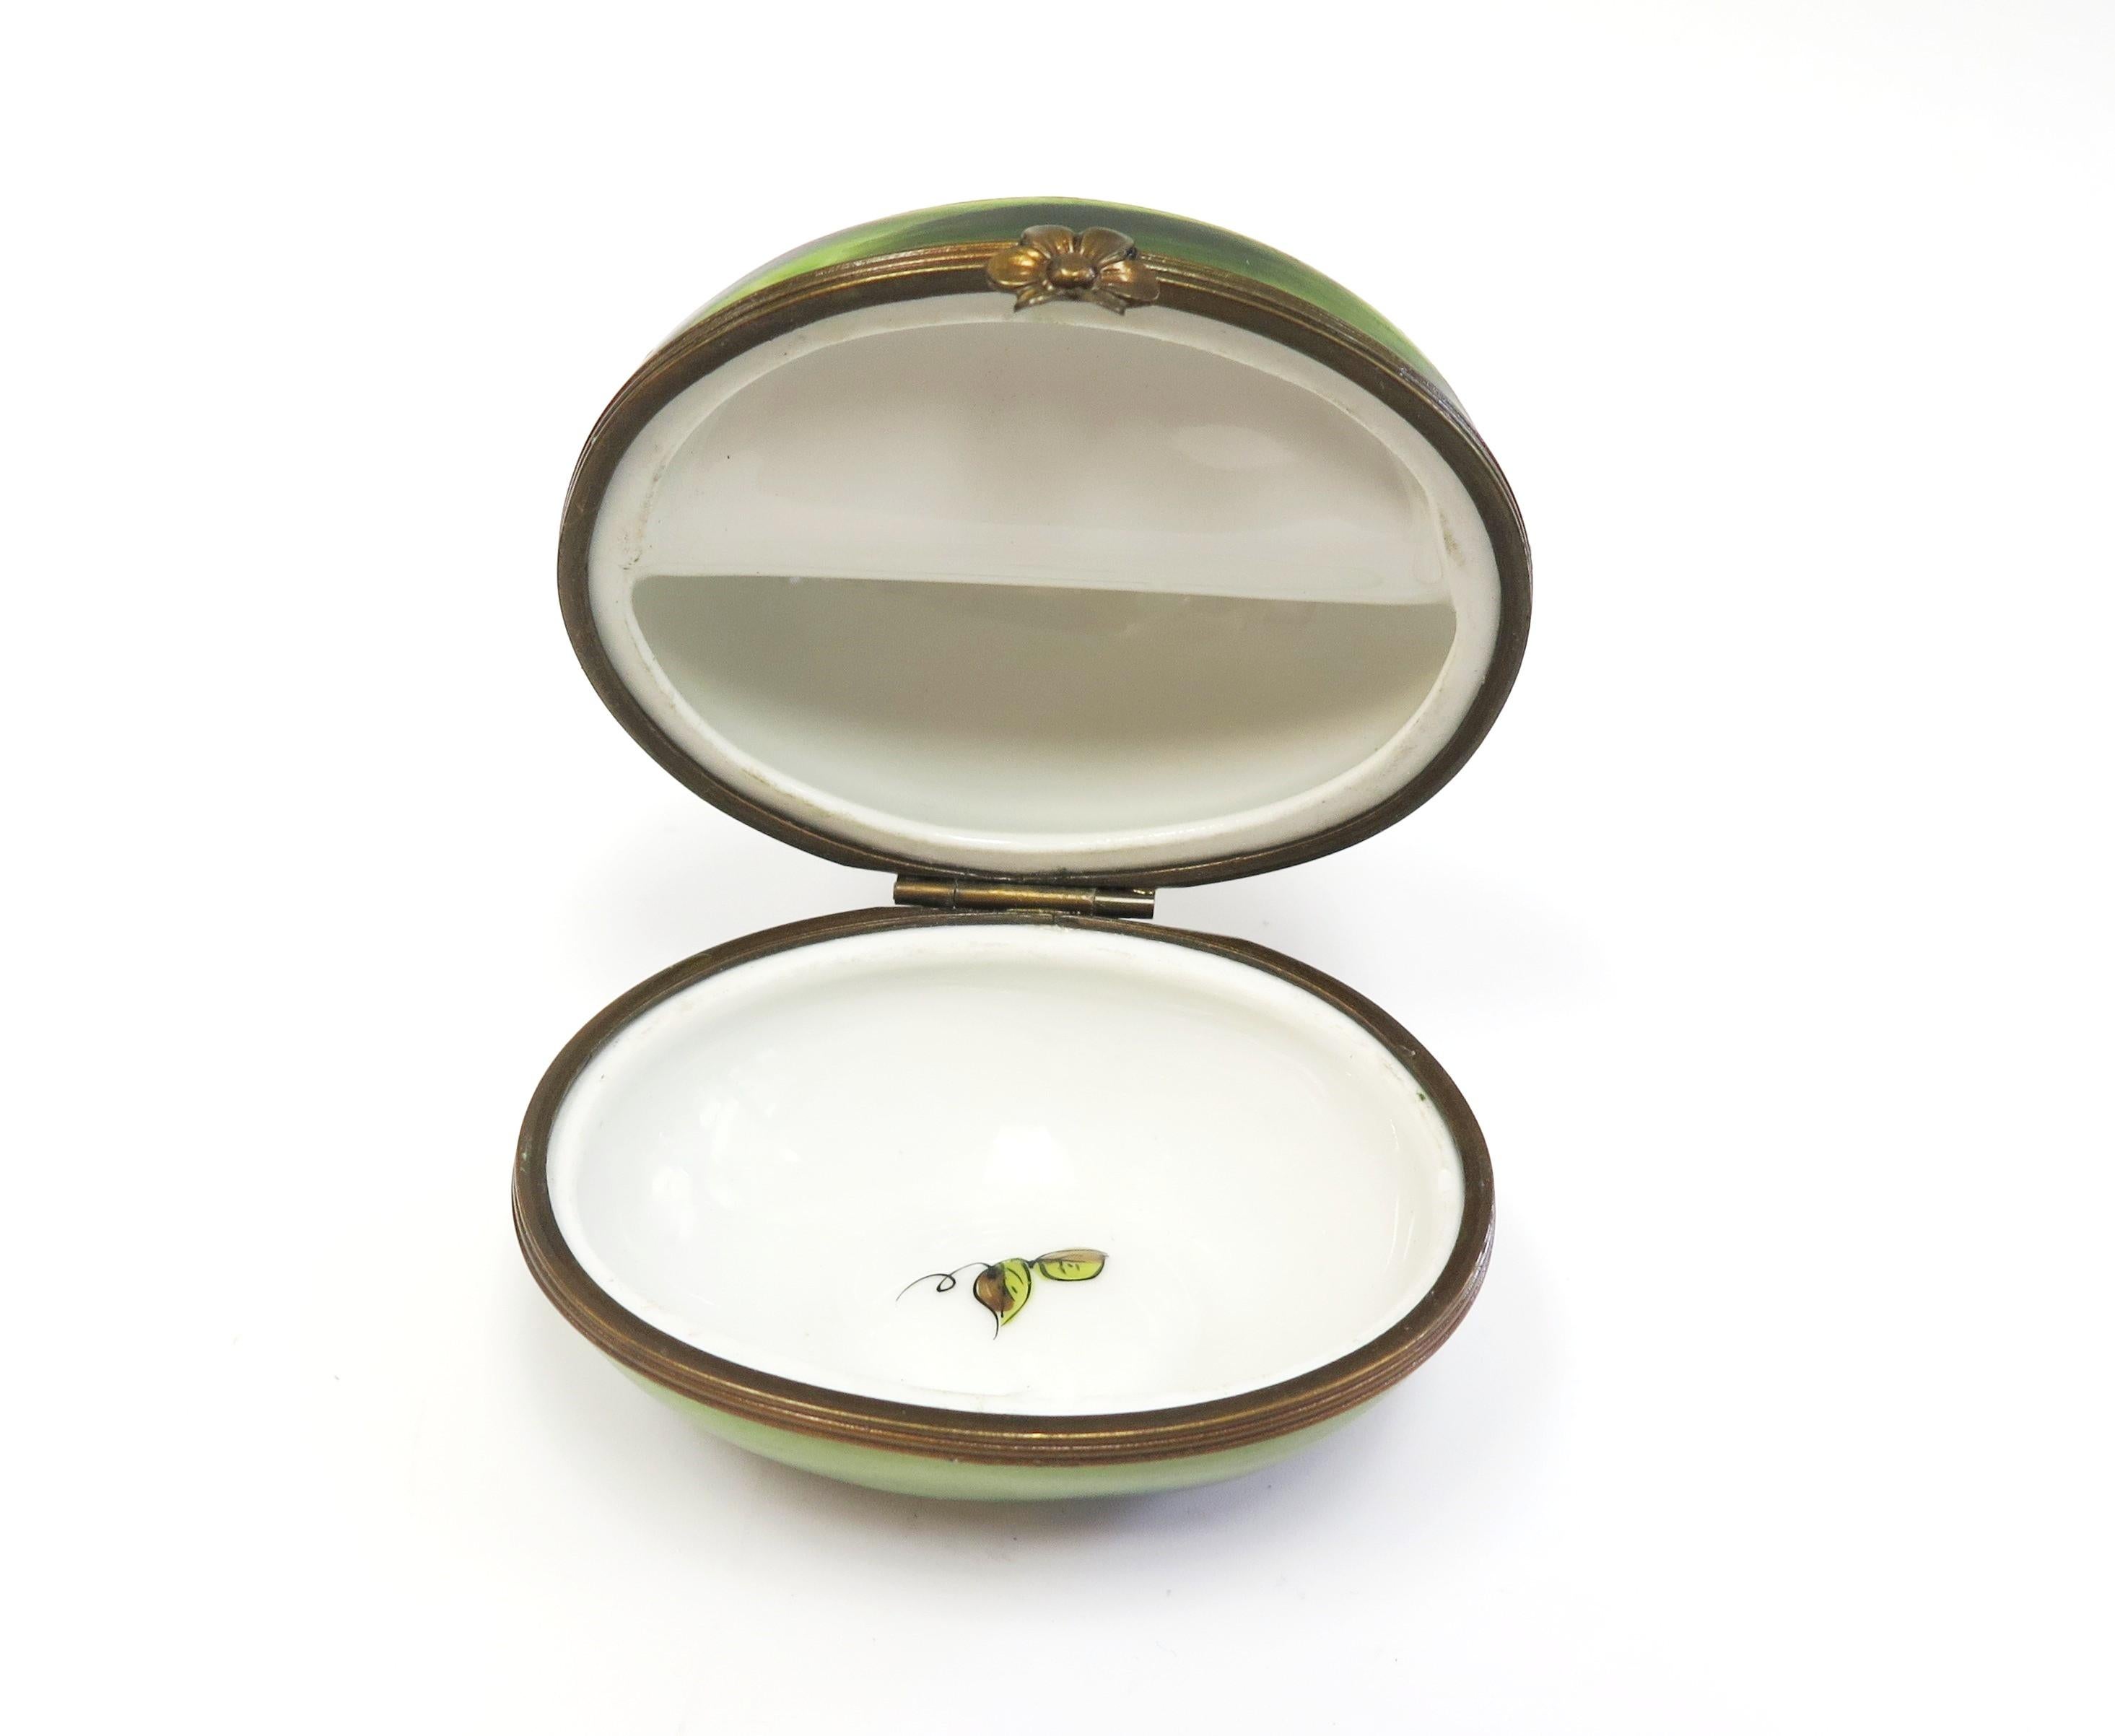 Tiffany & co hand painted Limoges box in the form of a watermelon with a quarter cut off and showing the red interior with the black seeds. The watermelon box opens in the middle with a hinged lid and is white on the inside. The exterior is dark